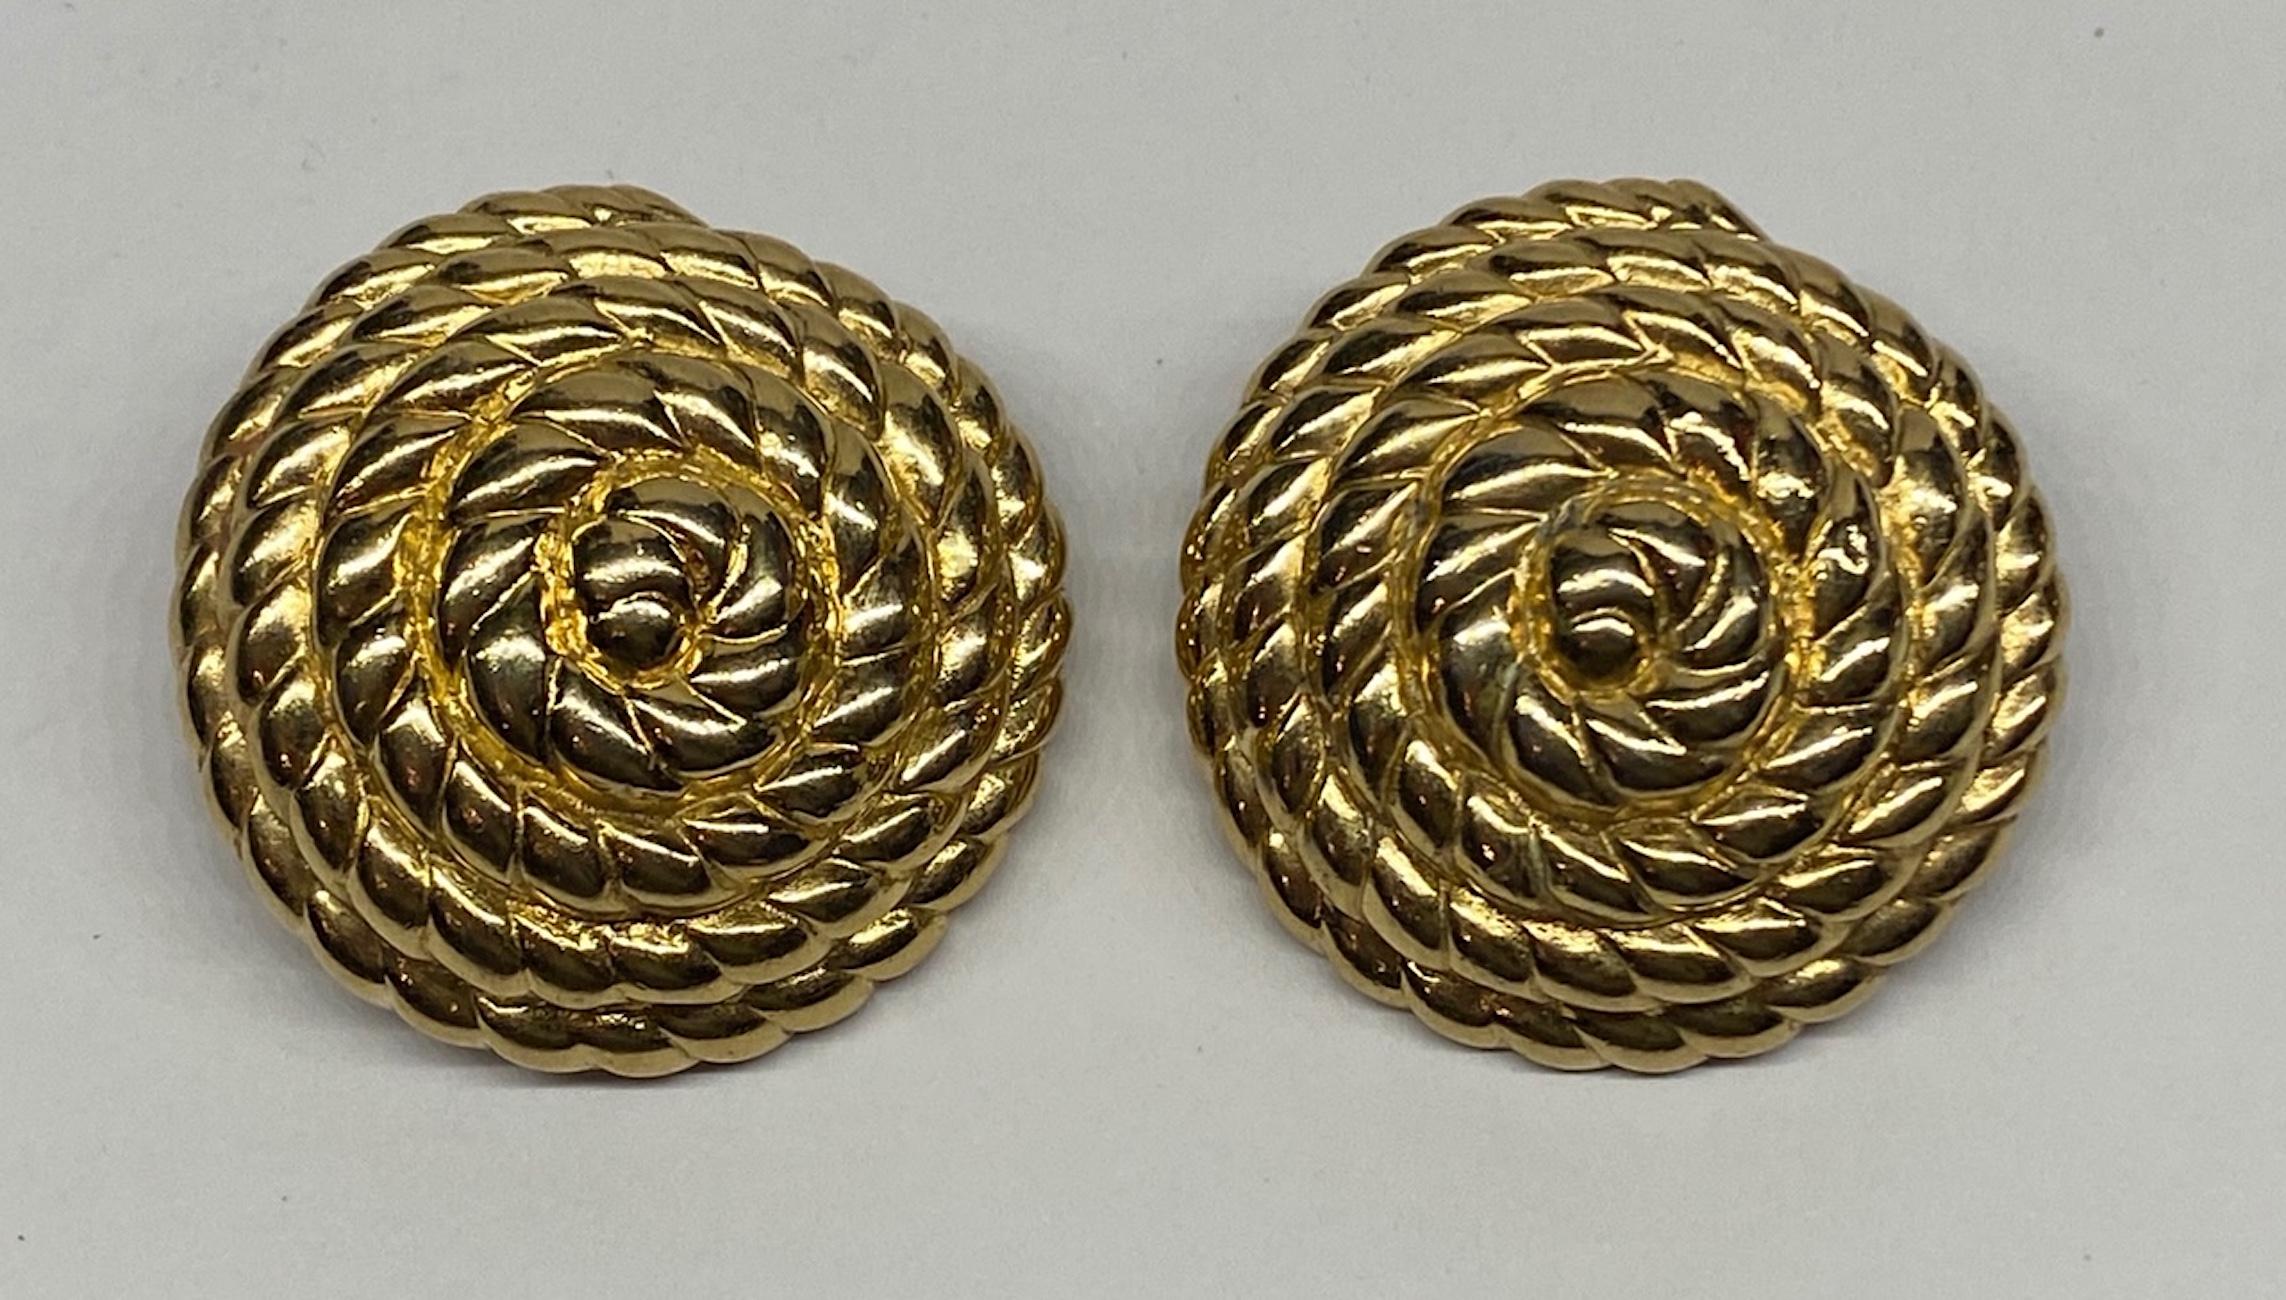 An elegant pair of nautical inspired button earrings of coiled rope design by American fashion jewelry company Ciner of New York City. Each earring is domed in shape and measures 1.25 in diameter an .5 of an inch high not including the clip. Each